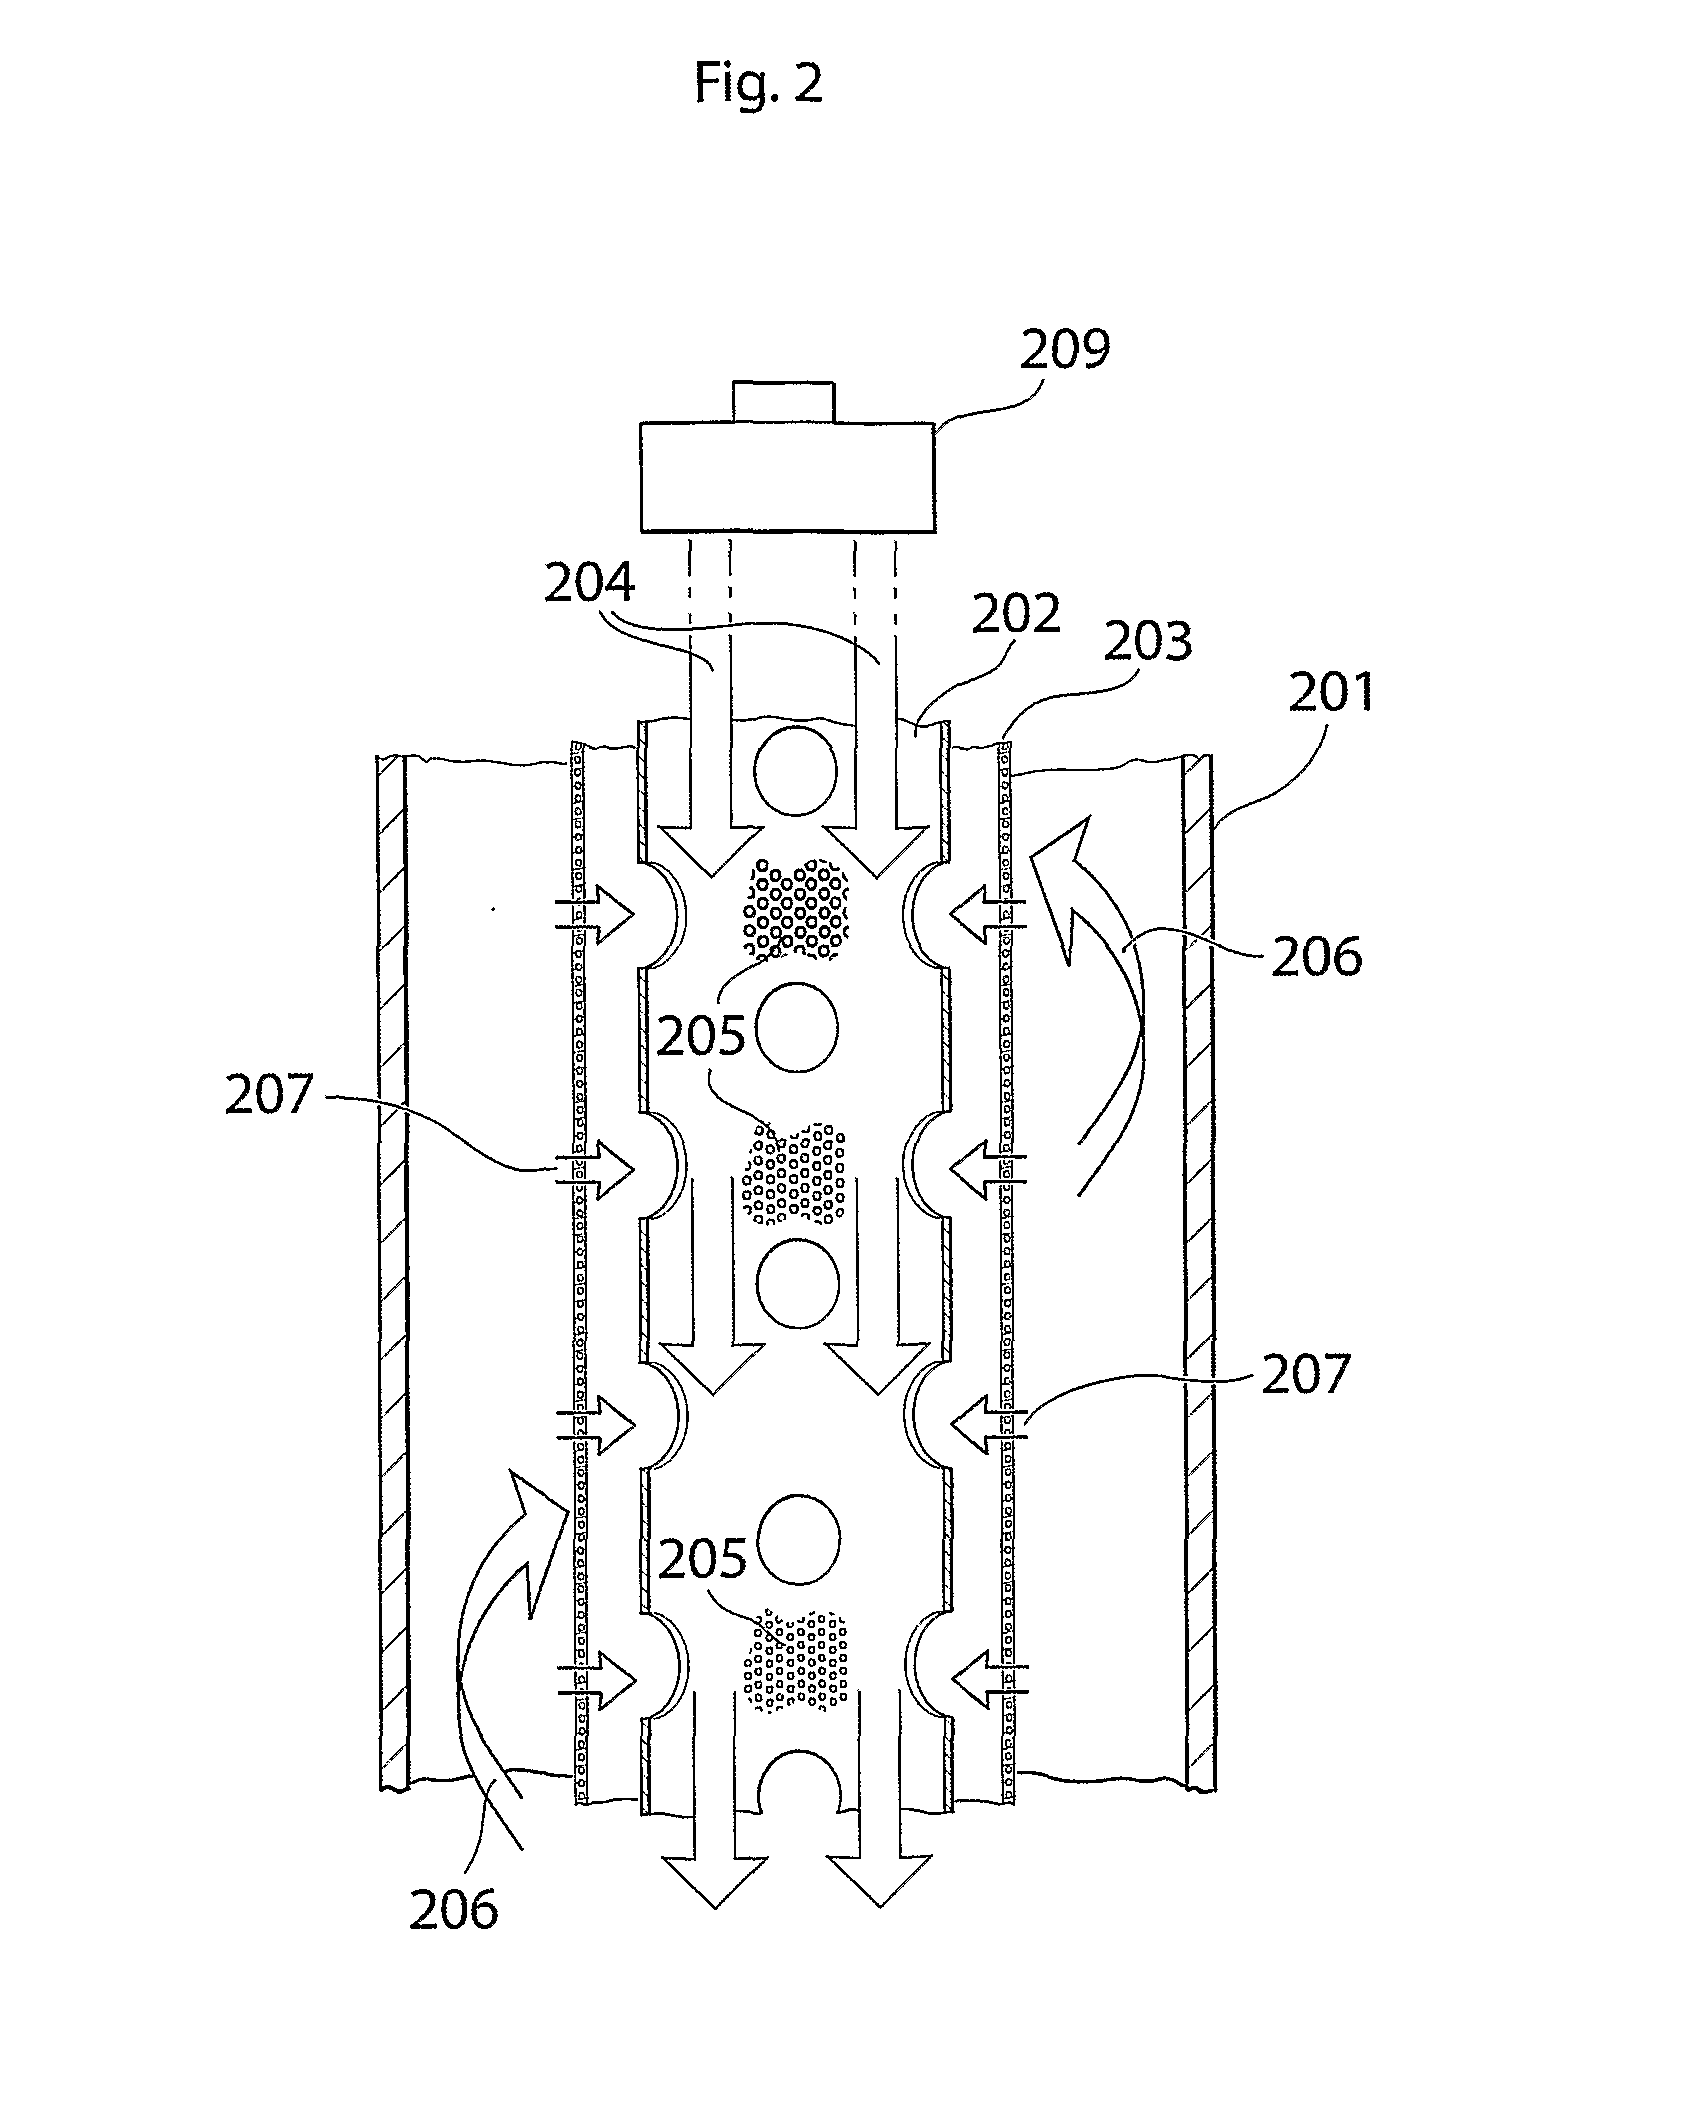 System and Method for Producing Dry Formulations